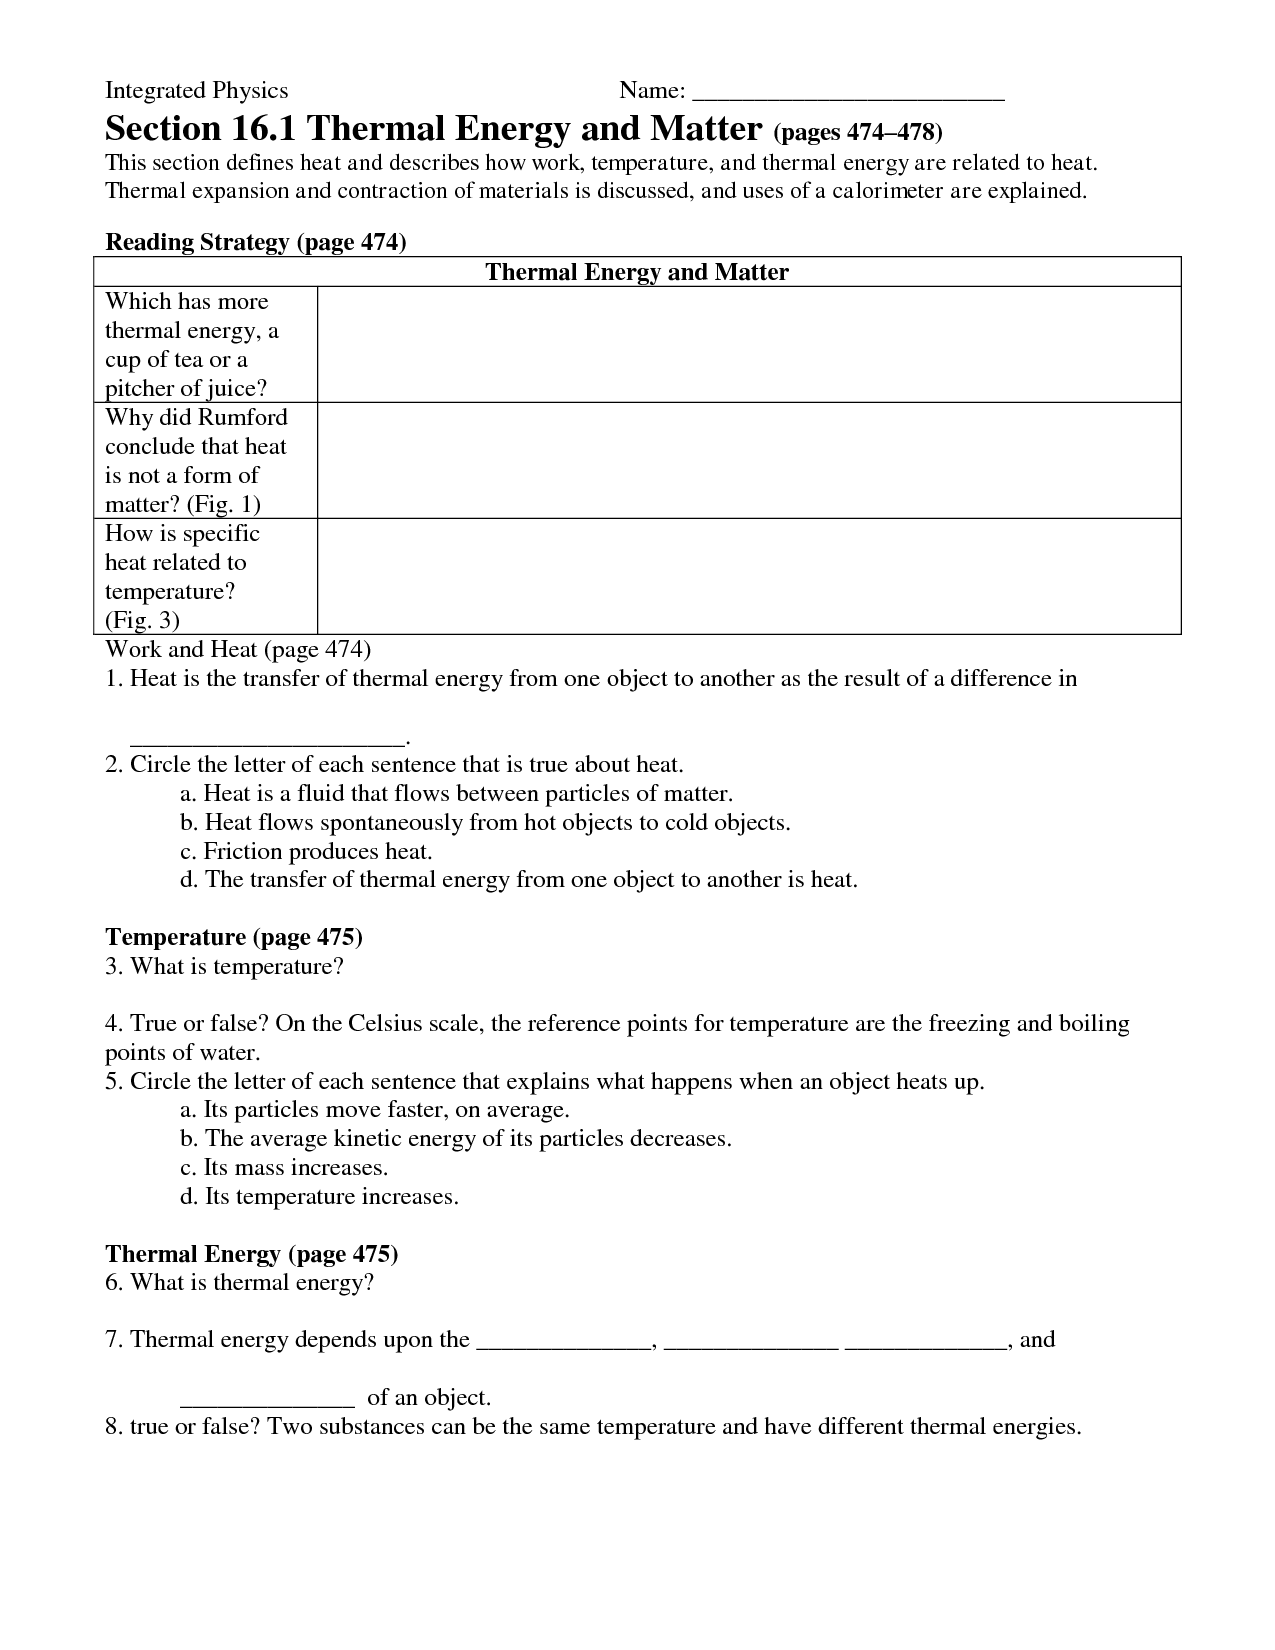 Heat and Thermal Energy Worksheet Answers Image